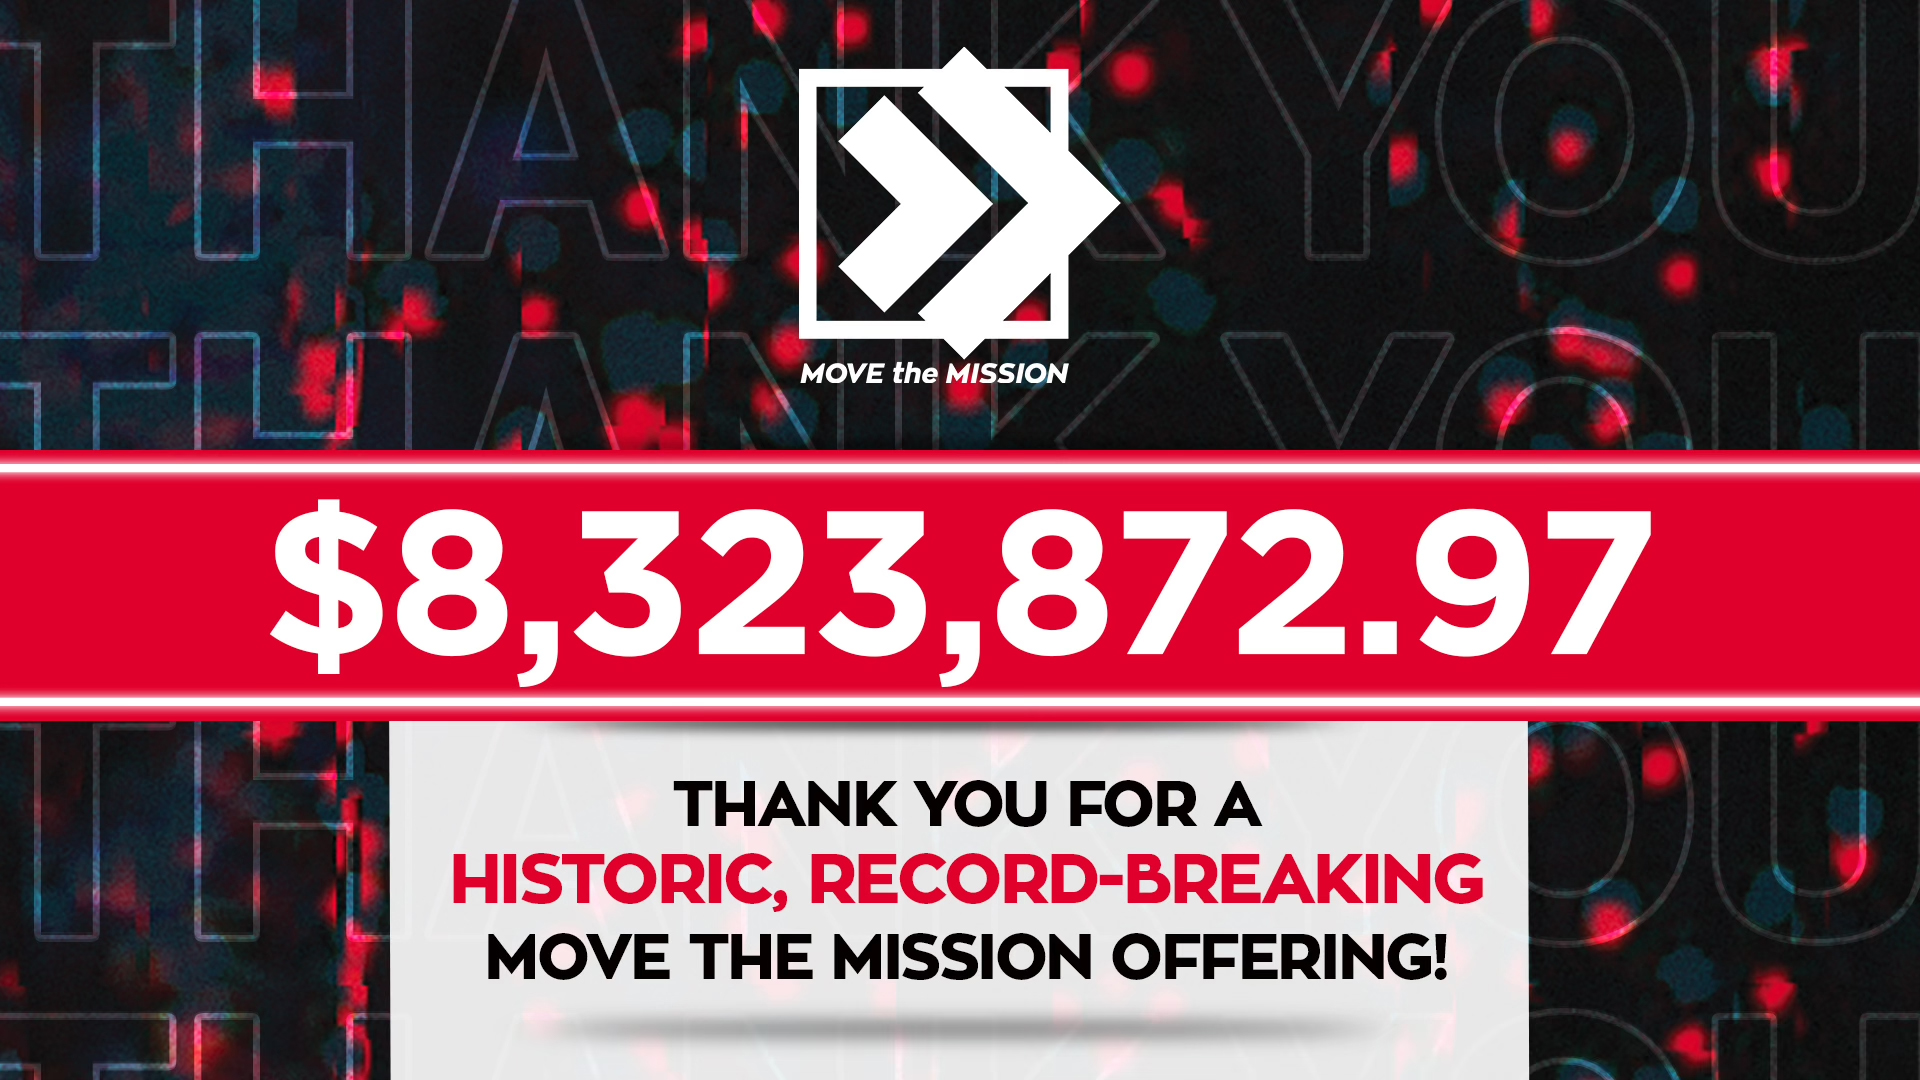 Move the Mission 2022: $8,323,872.97